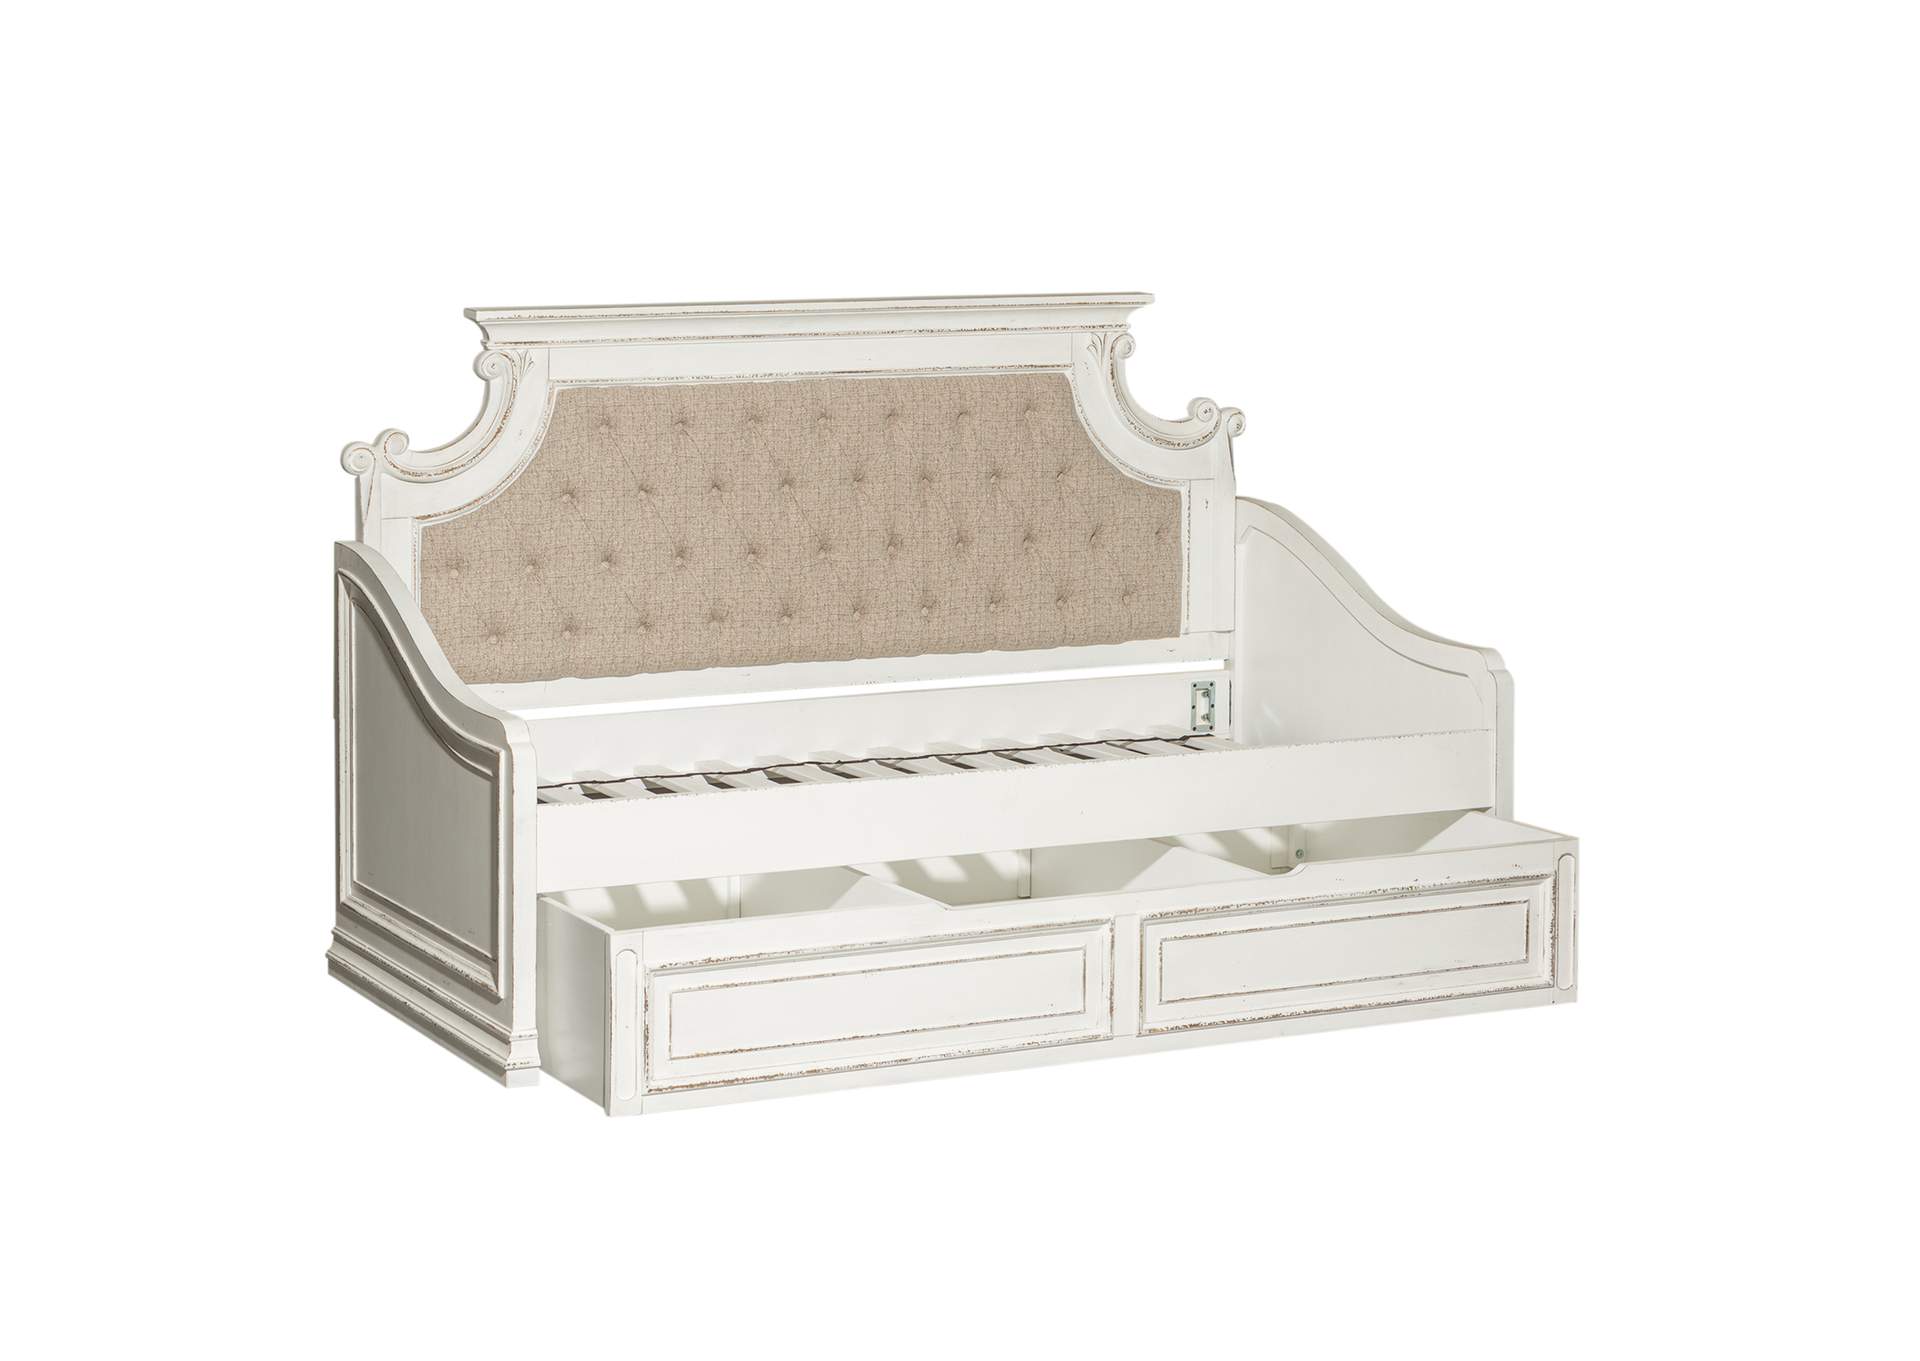 Magnolia Manor Antique White Twin, Antique White Twin Bed With Trundle